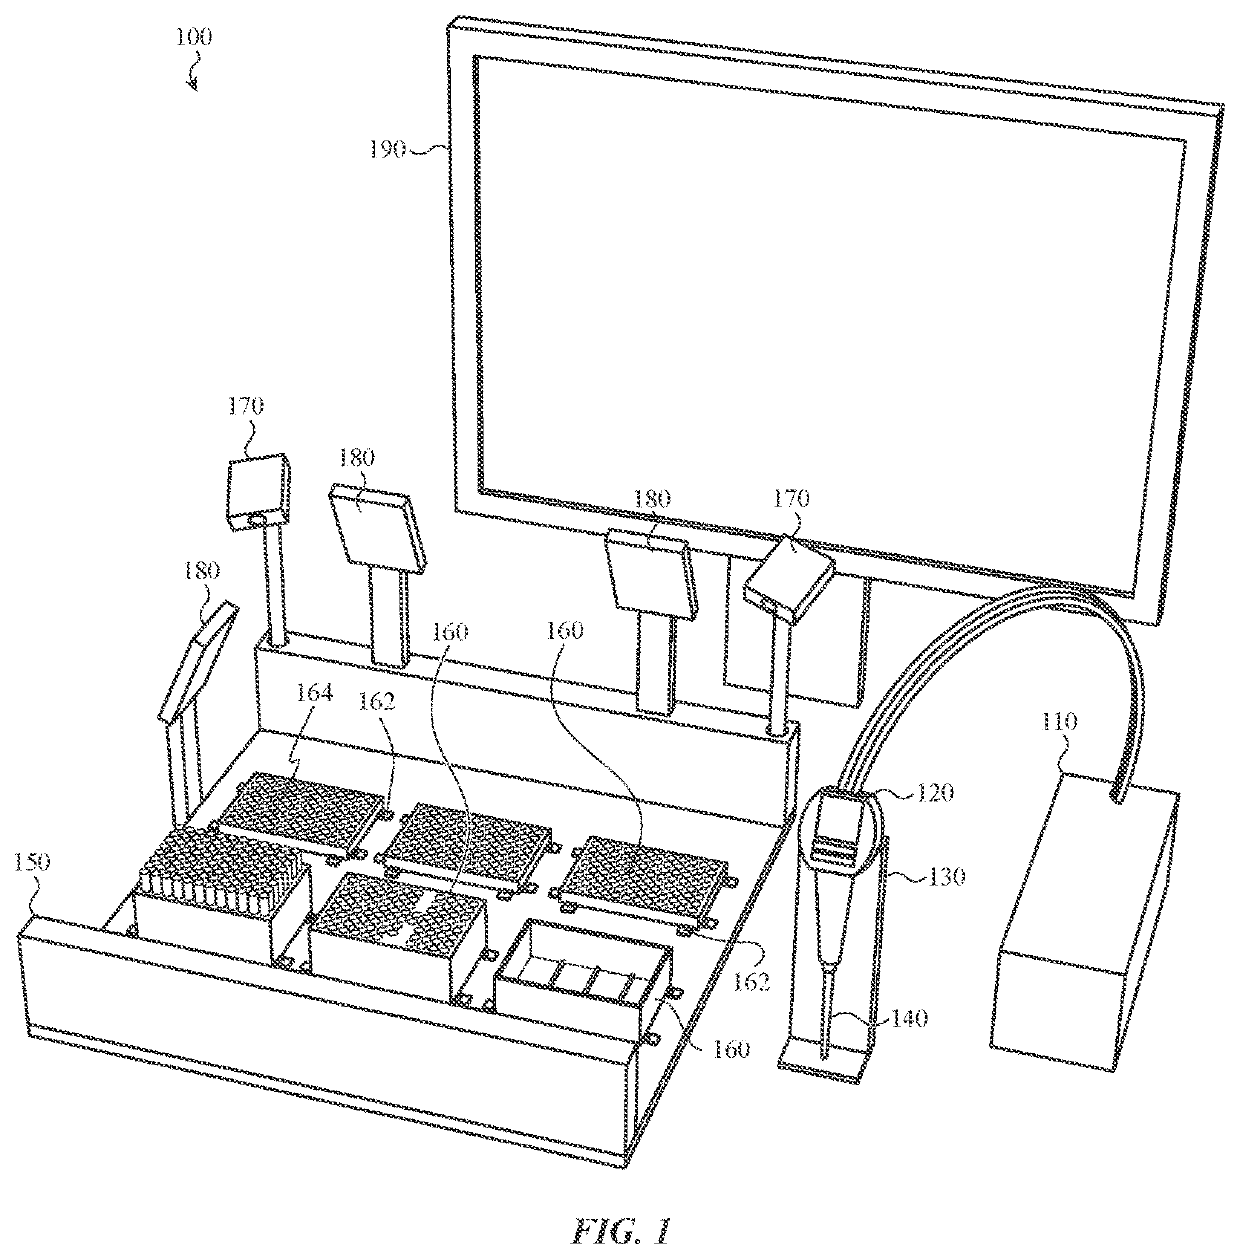 Verification pipette and vision apparatus